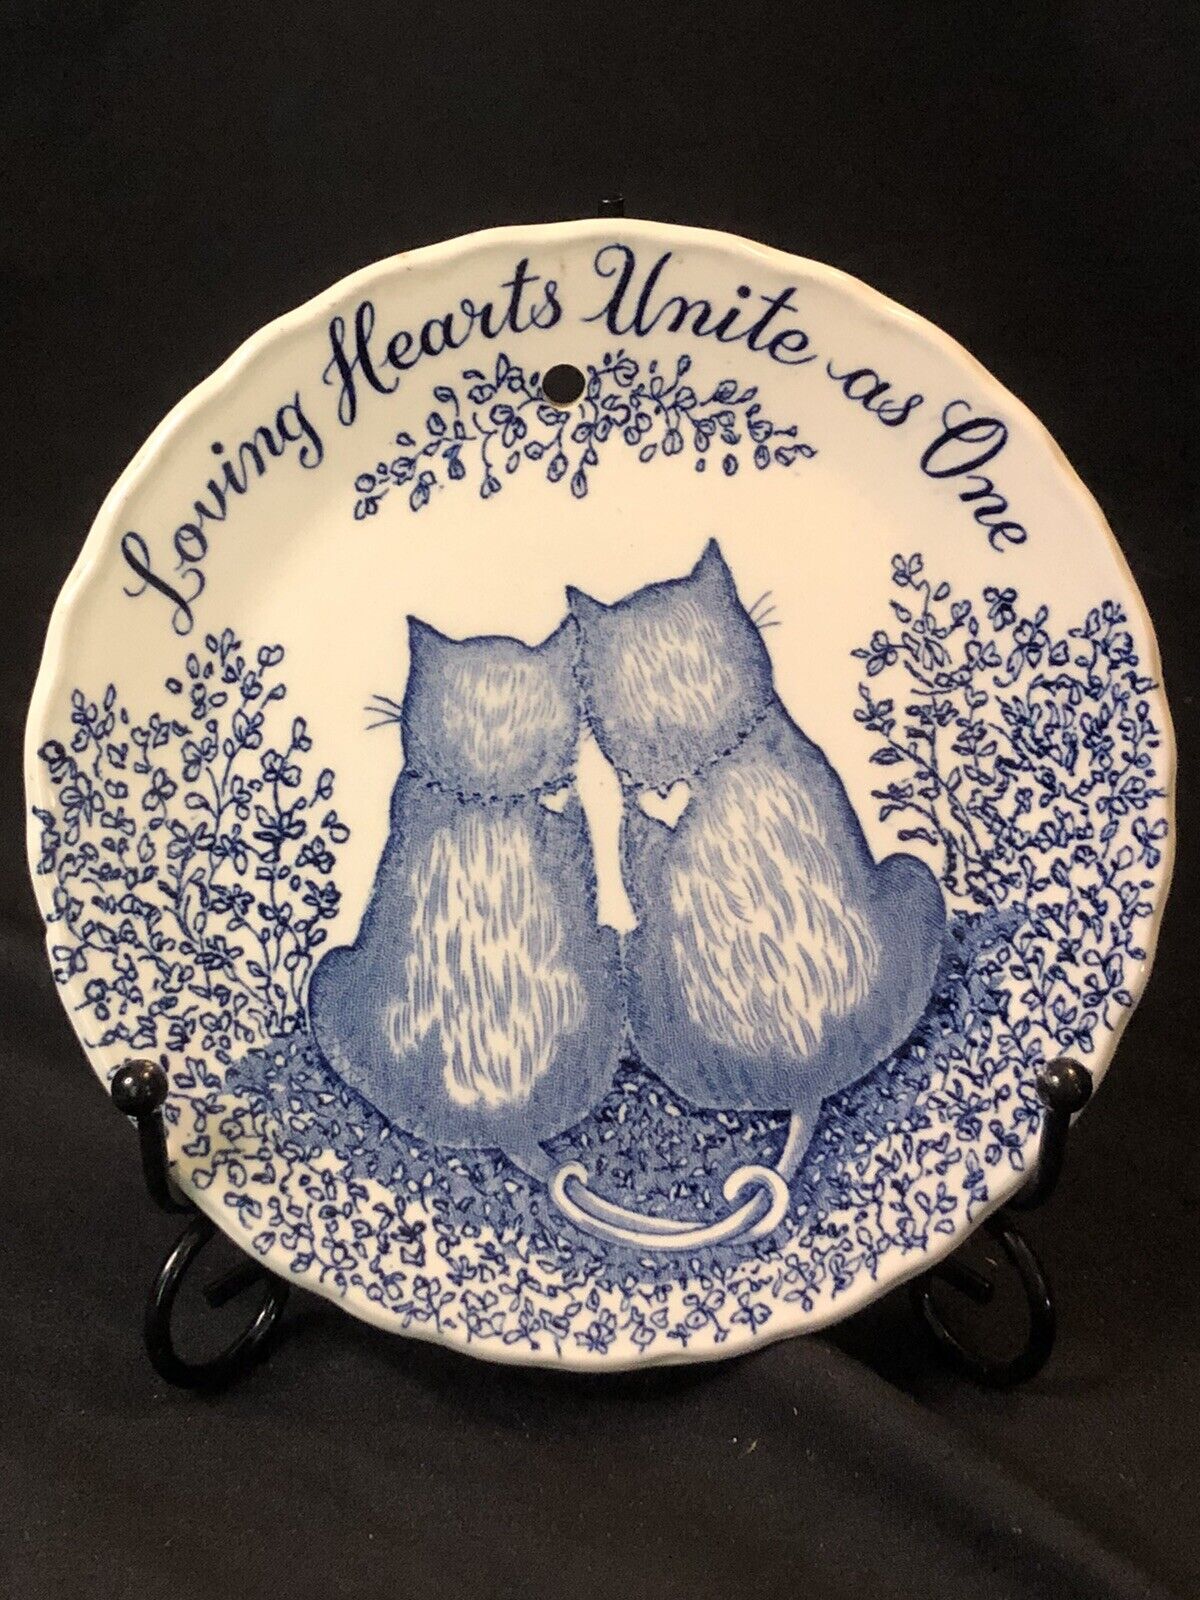 VTG Royal Crownford Ironstone Plate, Blue Entwined Cats “Loving Hearts Unite…”